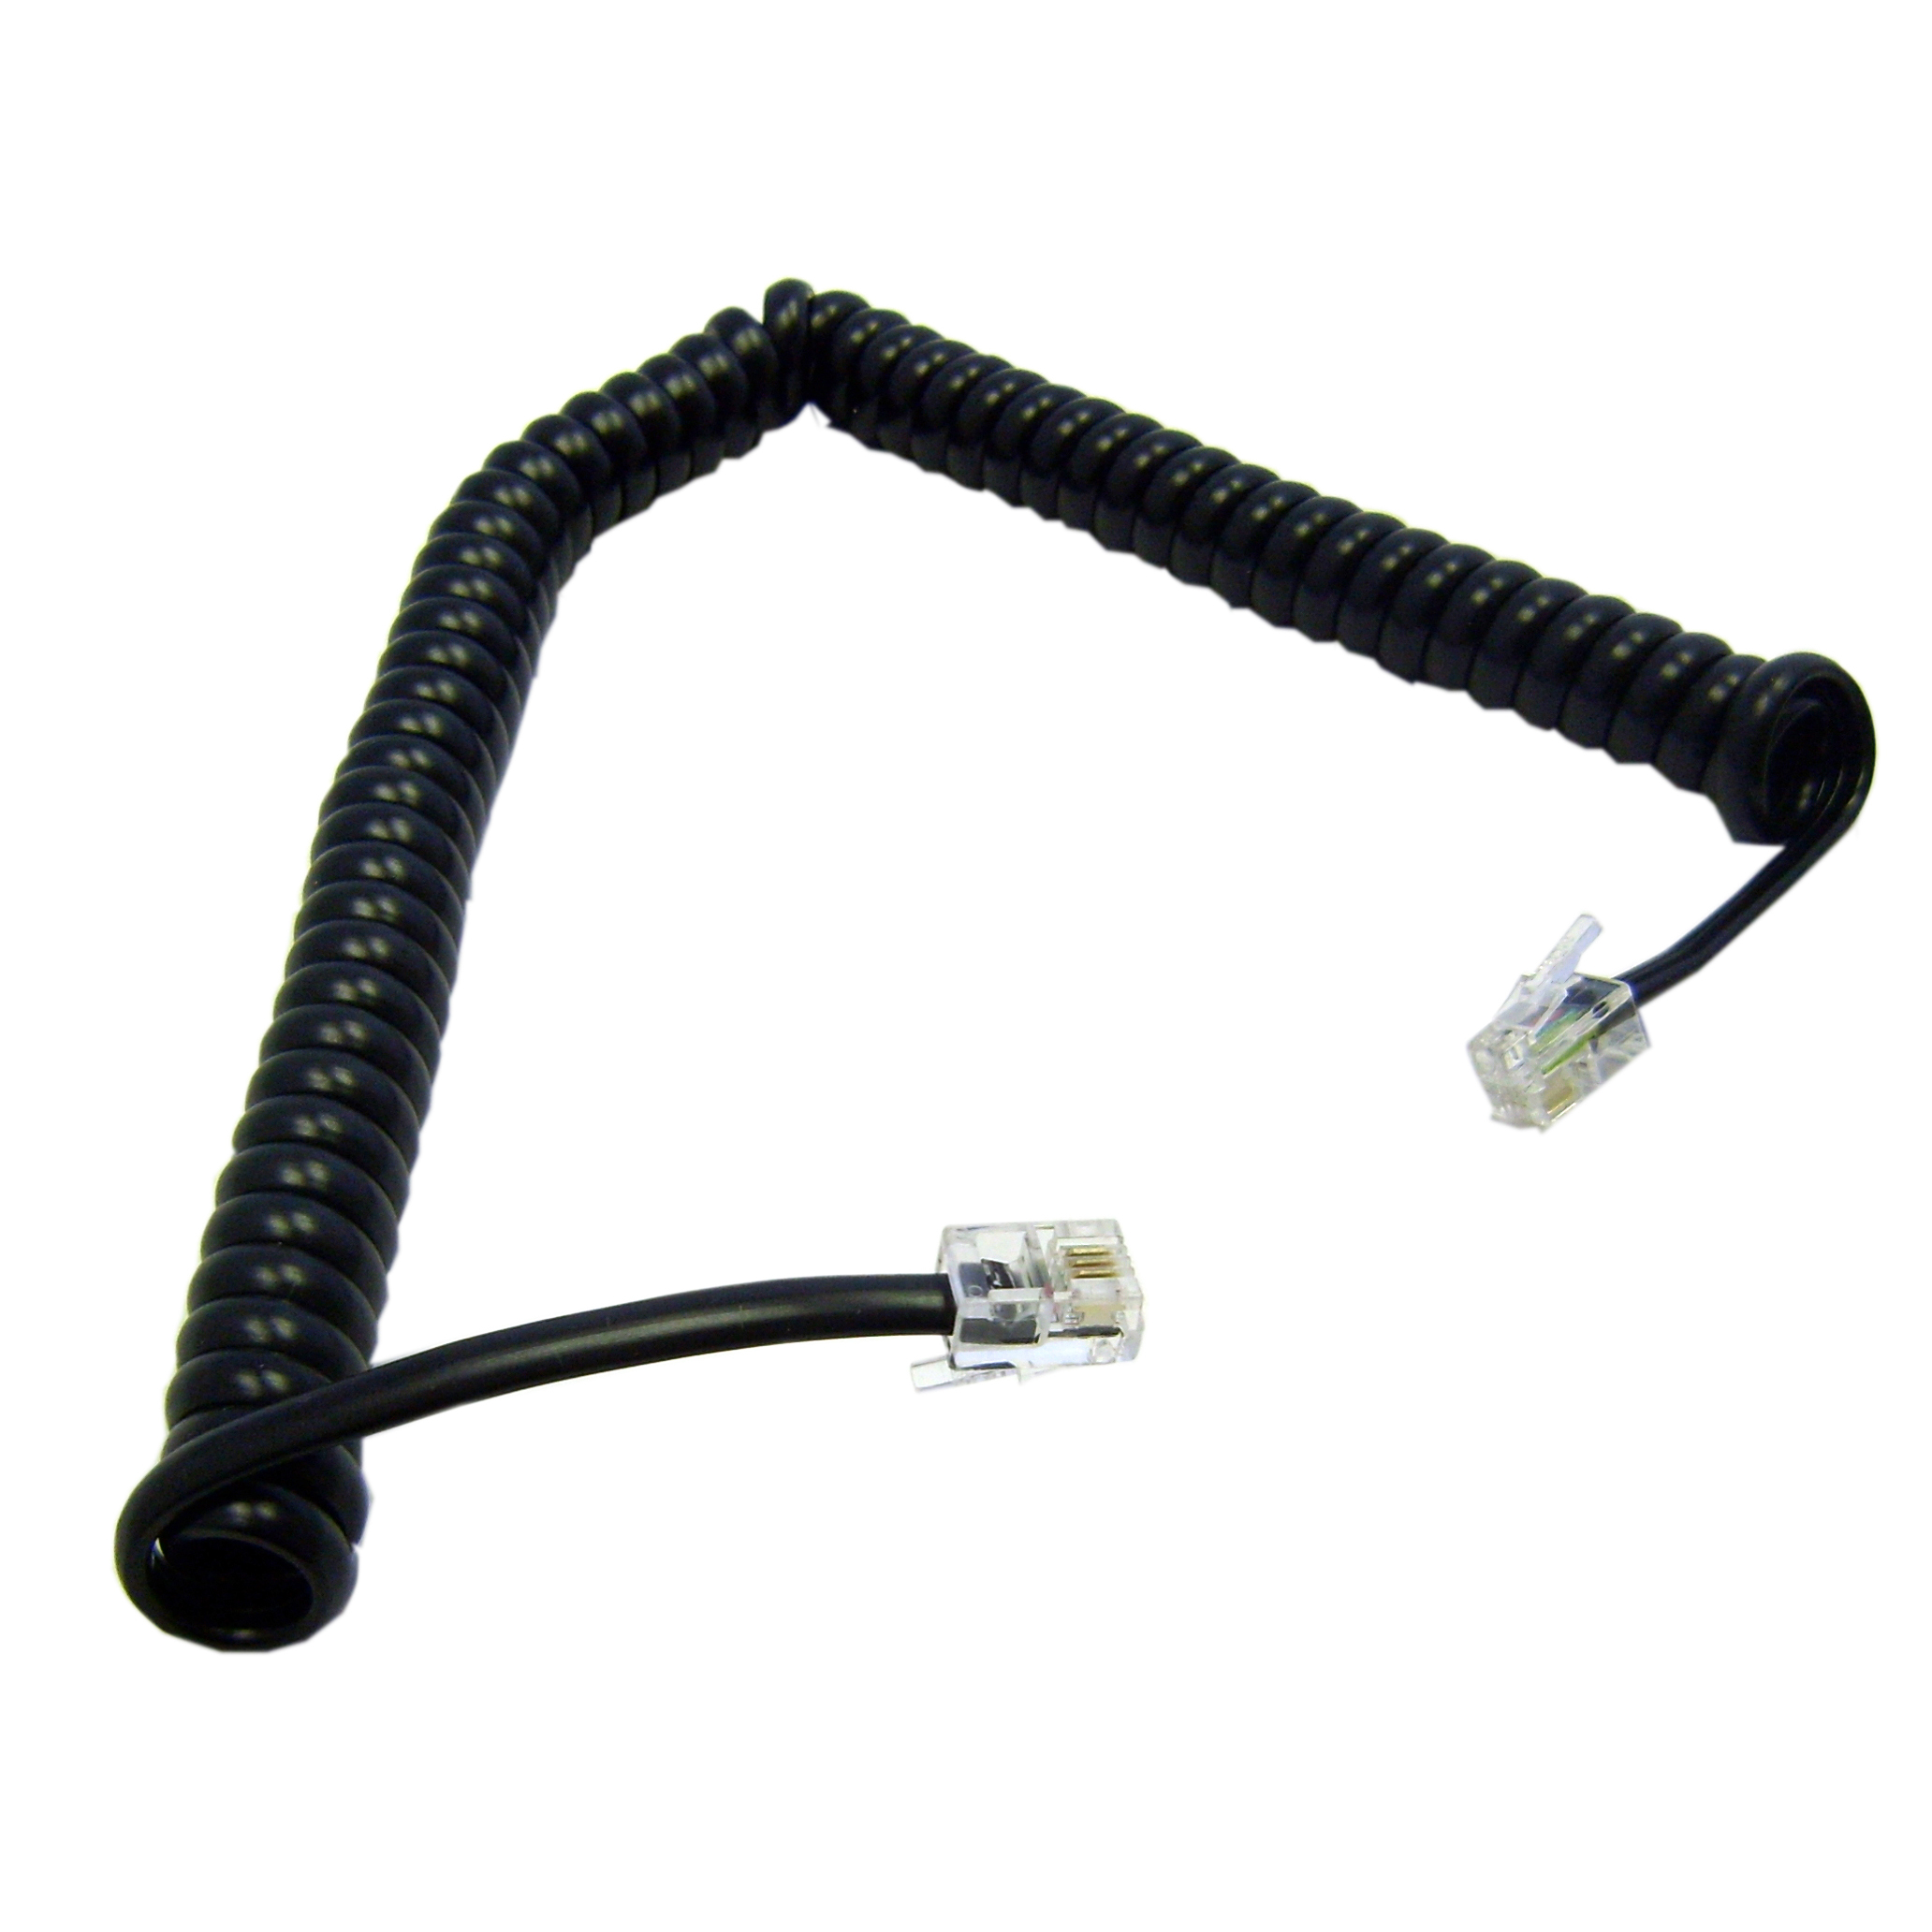 High Quality Telephone Handset Curly Cord Cable for Toshiba IP5 Series phones 